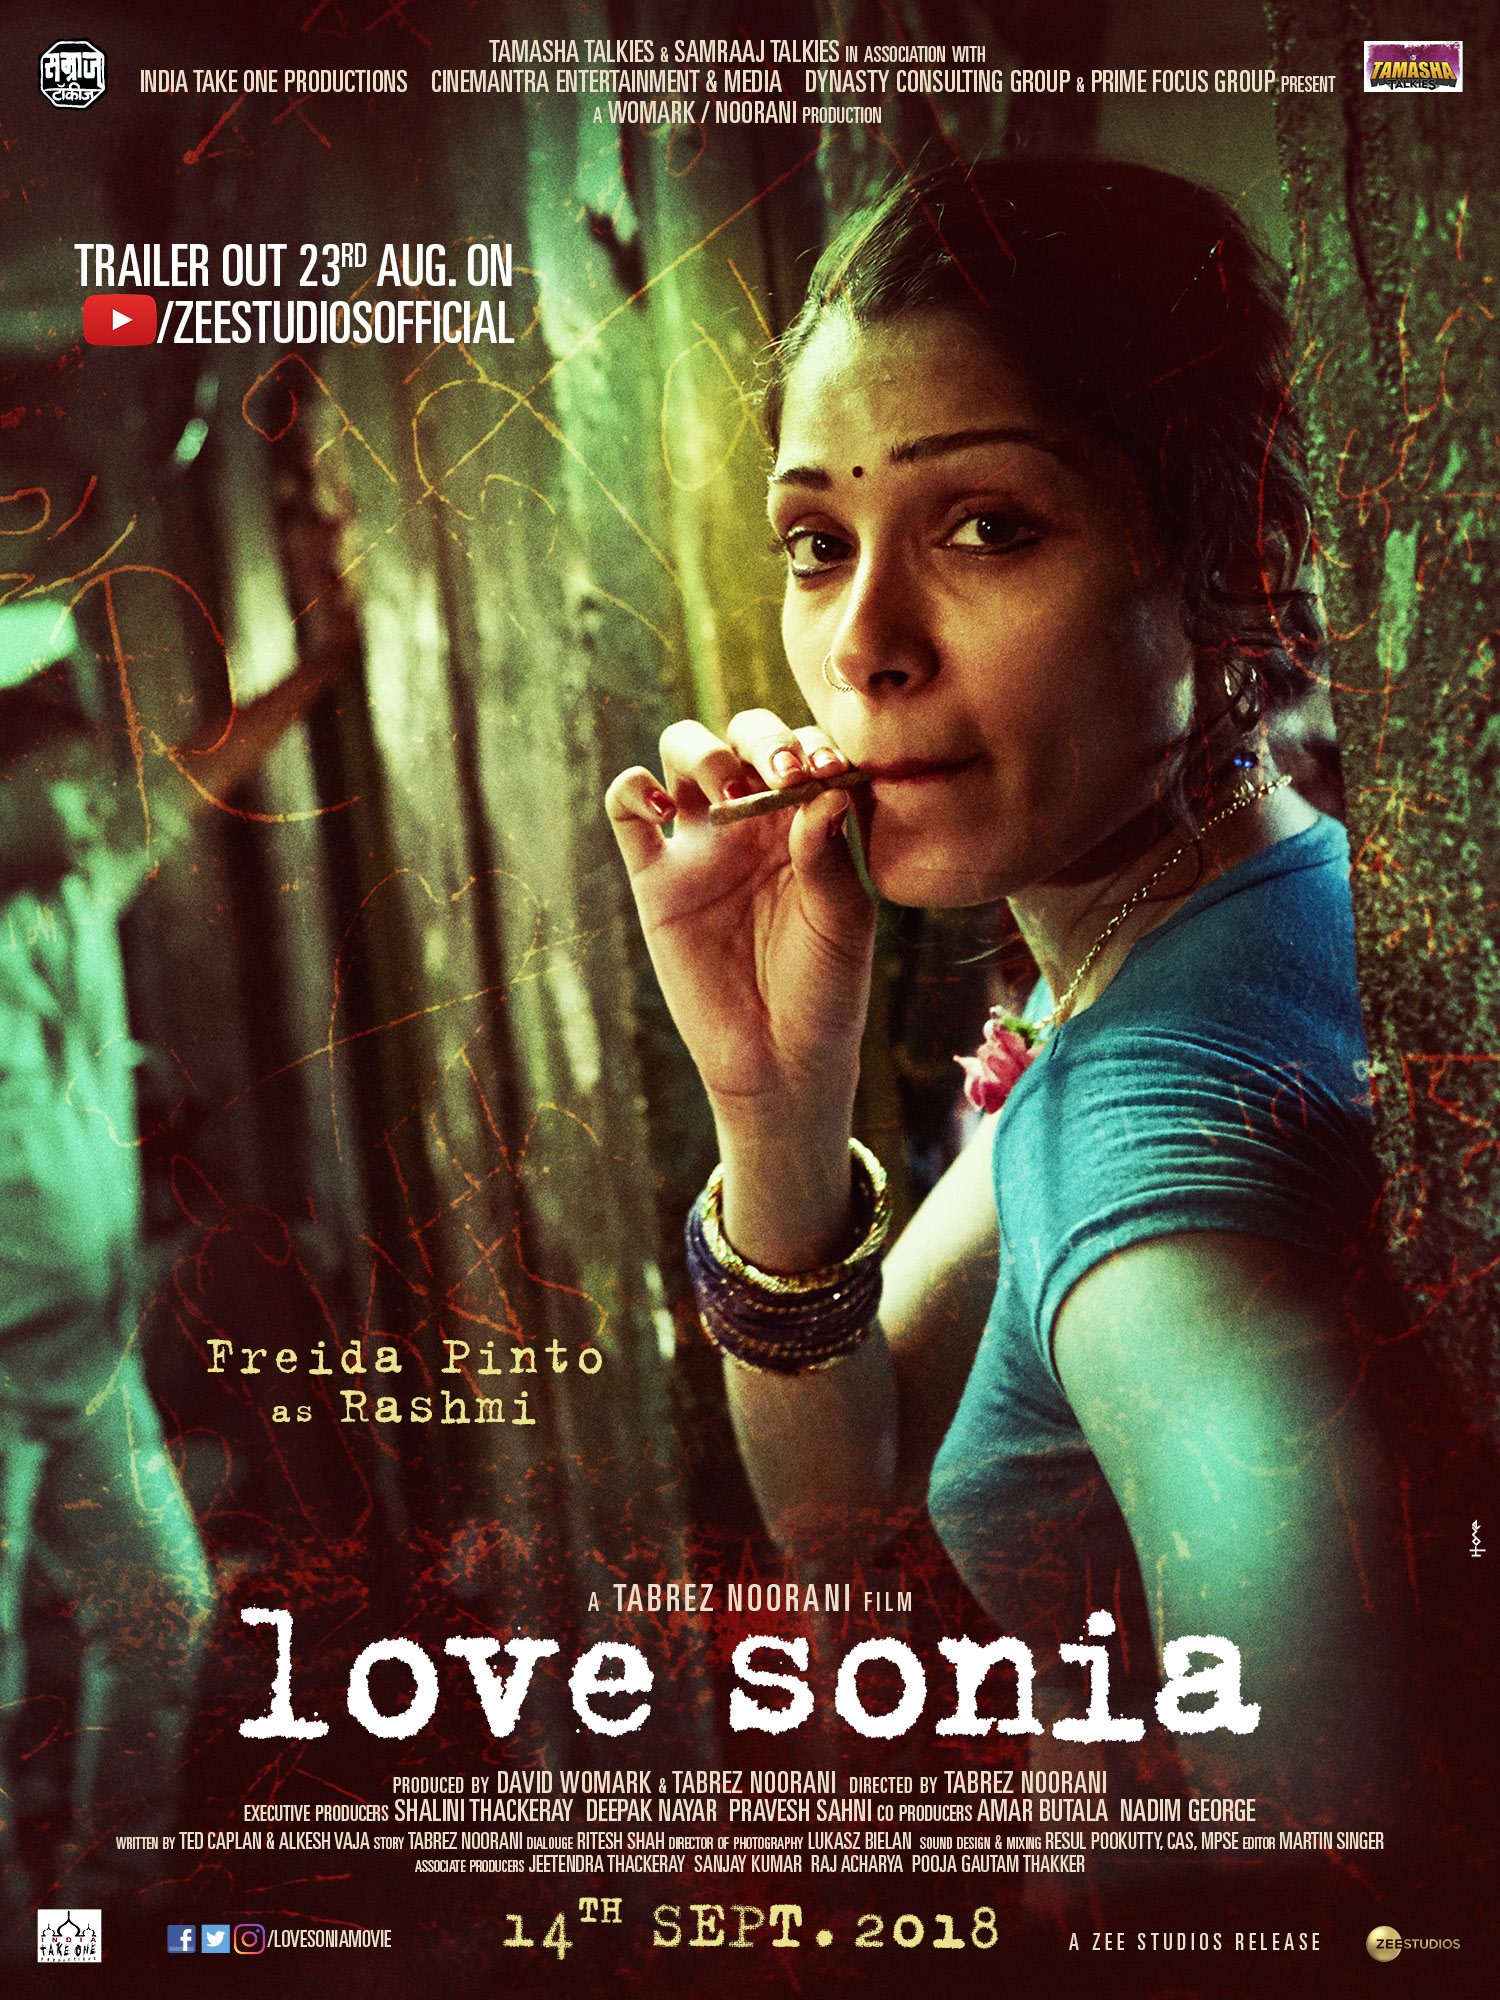 Love Sonia Film Trailer A 17 Year Old Takes The Journey Of A Lifetime To Fight Againstallodds